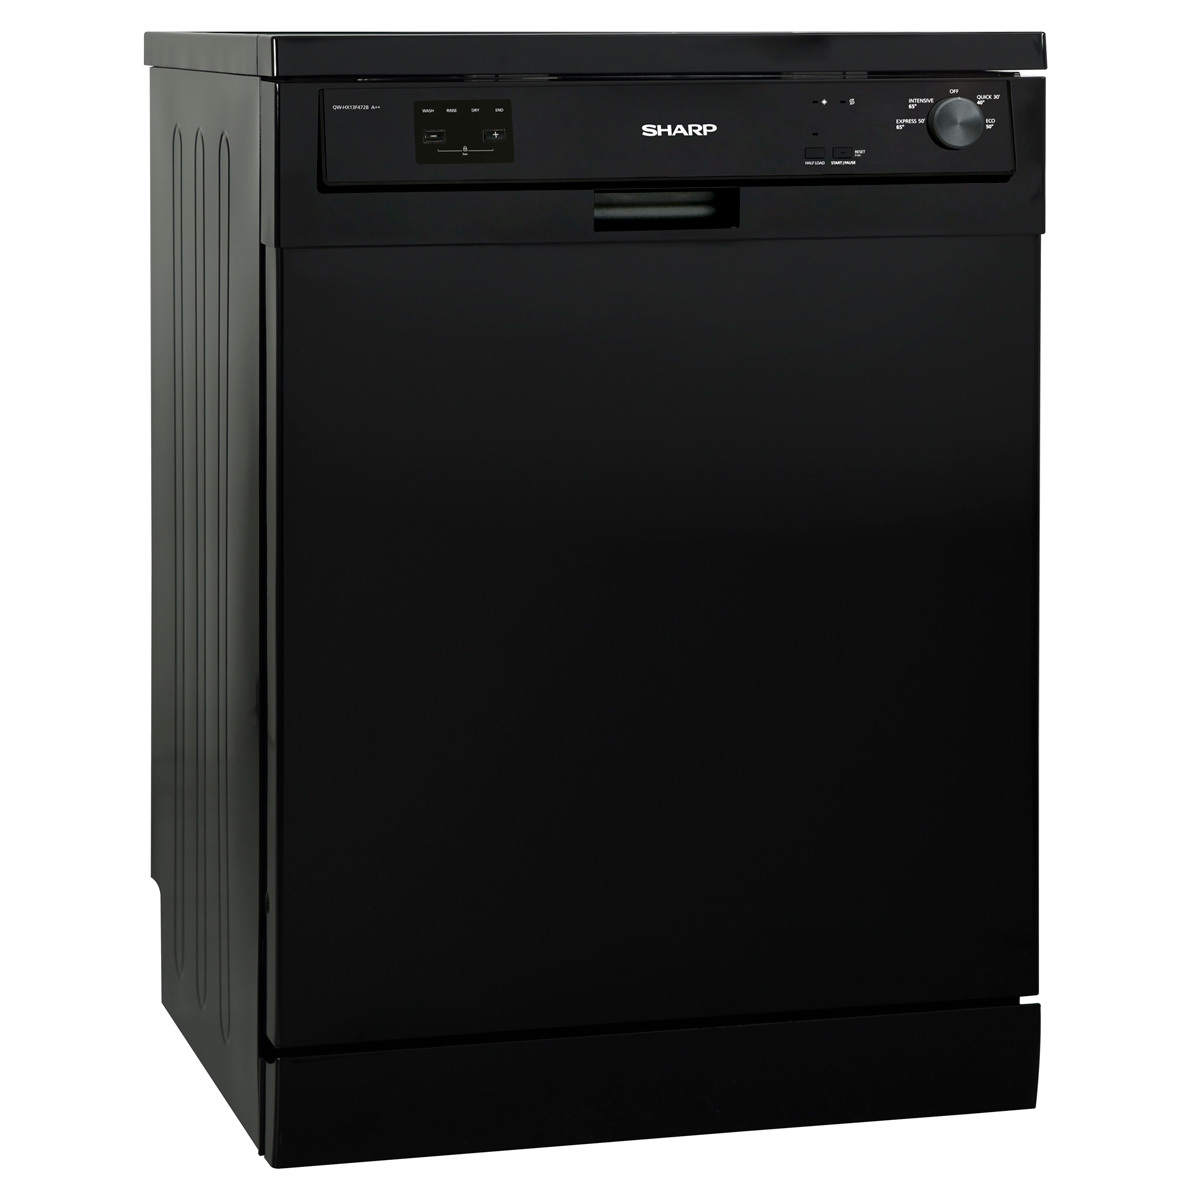 Sharp QW-HX13F472B, 13 Place Settings Dishwasher A++ Rated in Black